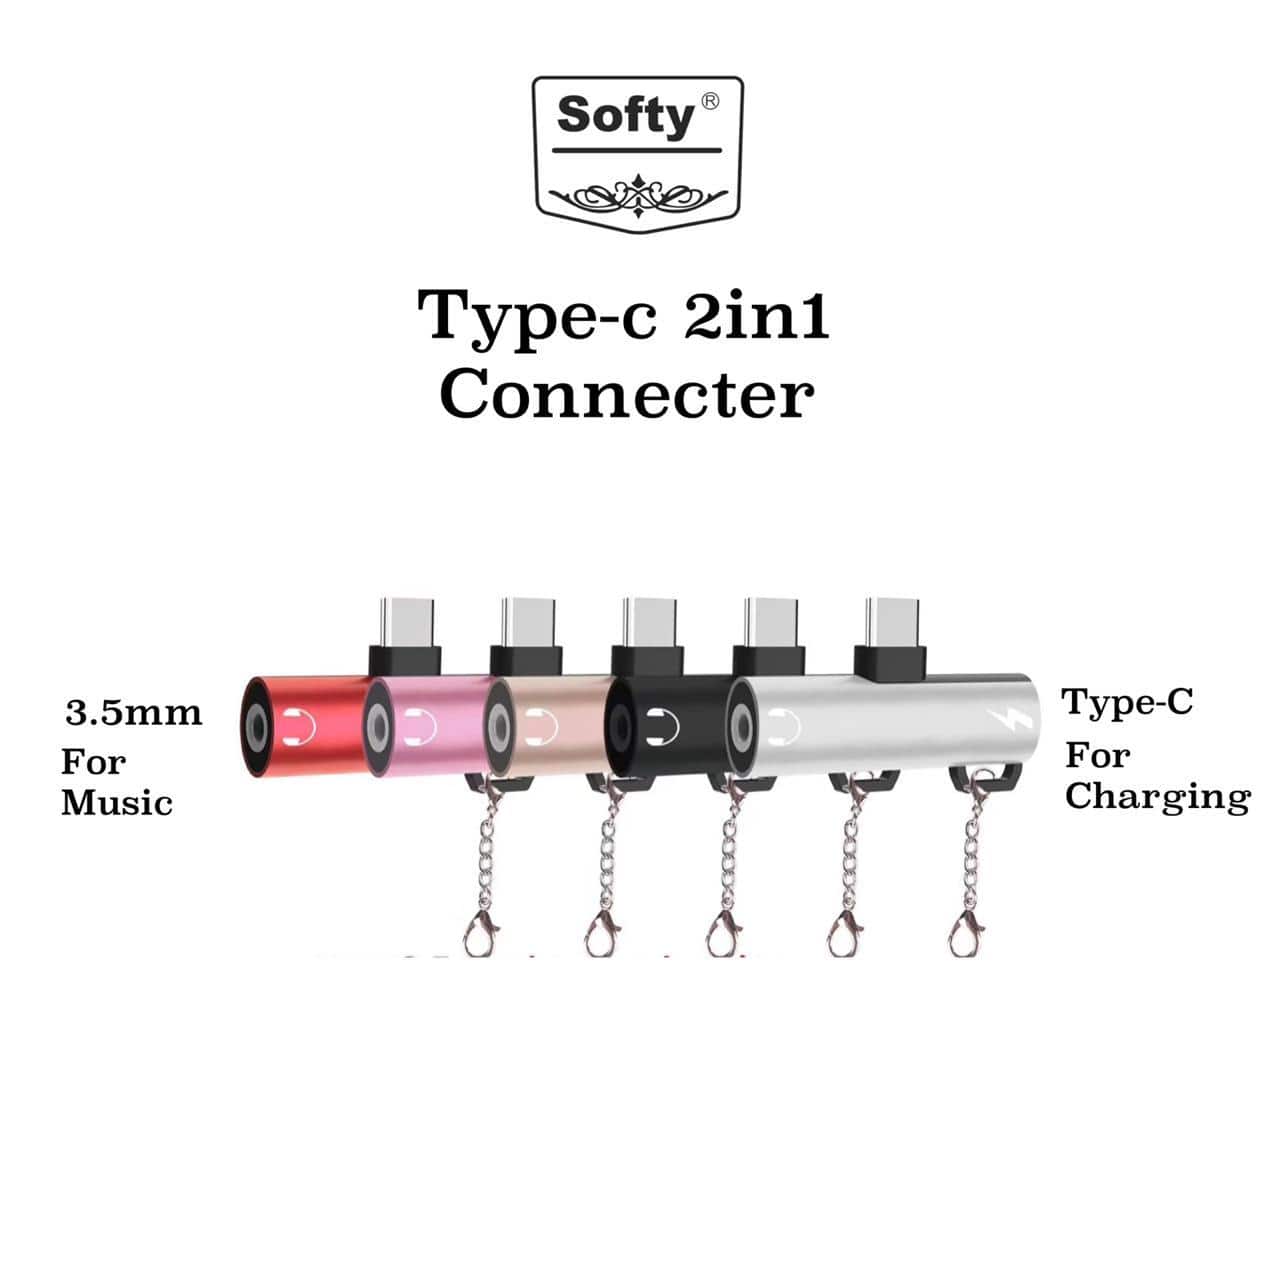 Softy premium quality 2in1 Type-C connector-Connectors-dealsplant